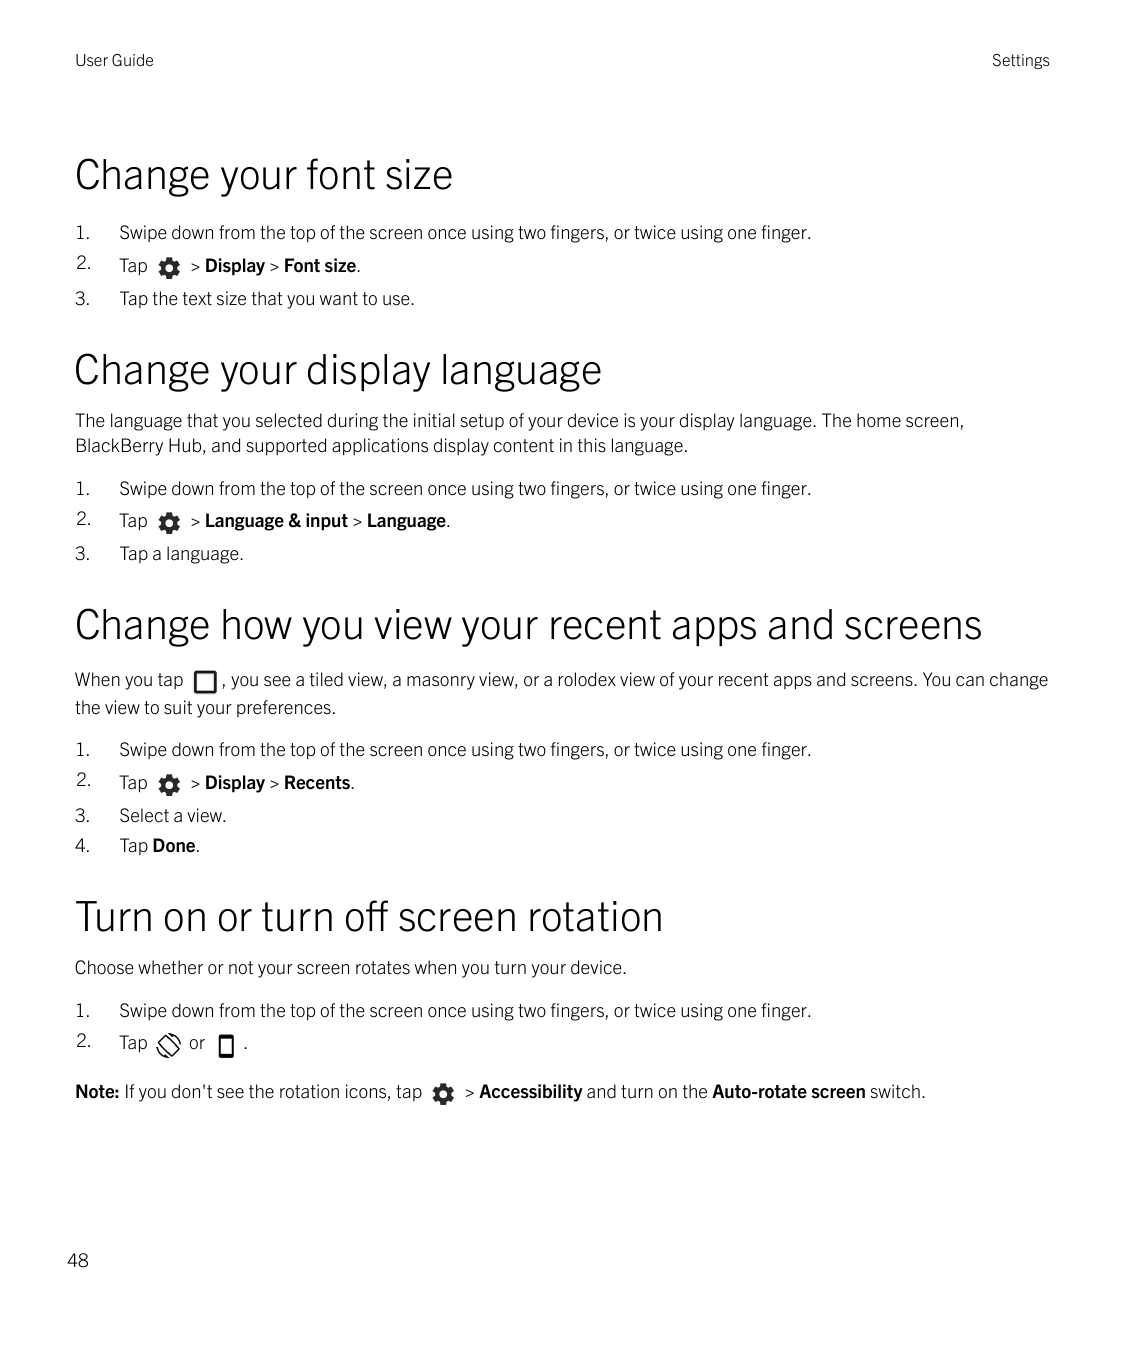 User GuideSettingsChange your font size1.Swipe down from the top of the screen once using two fingers, or twice using one finger